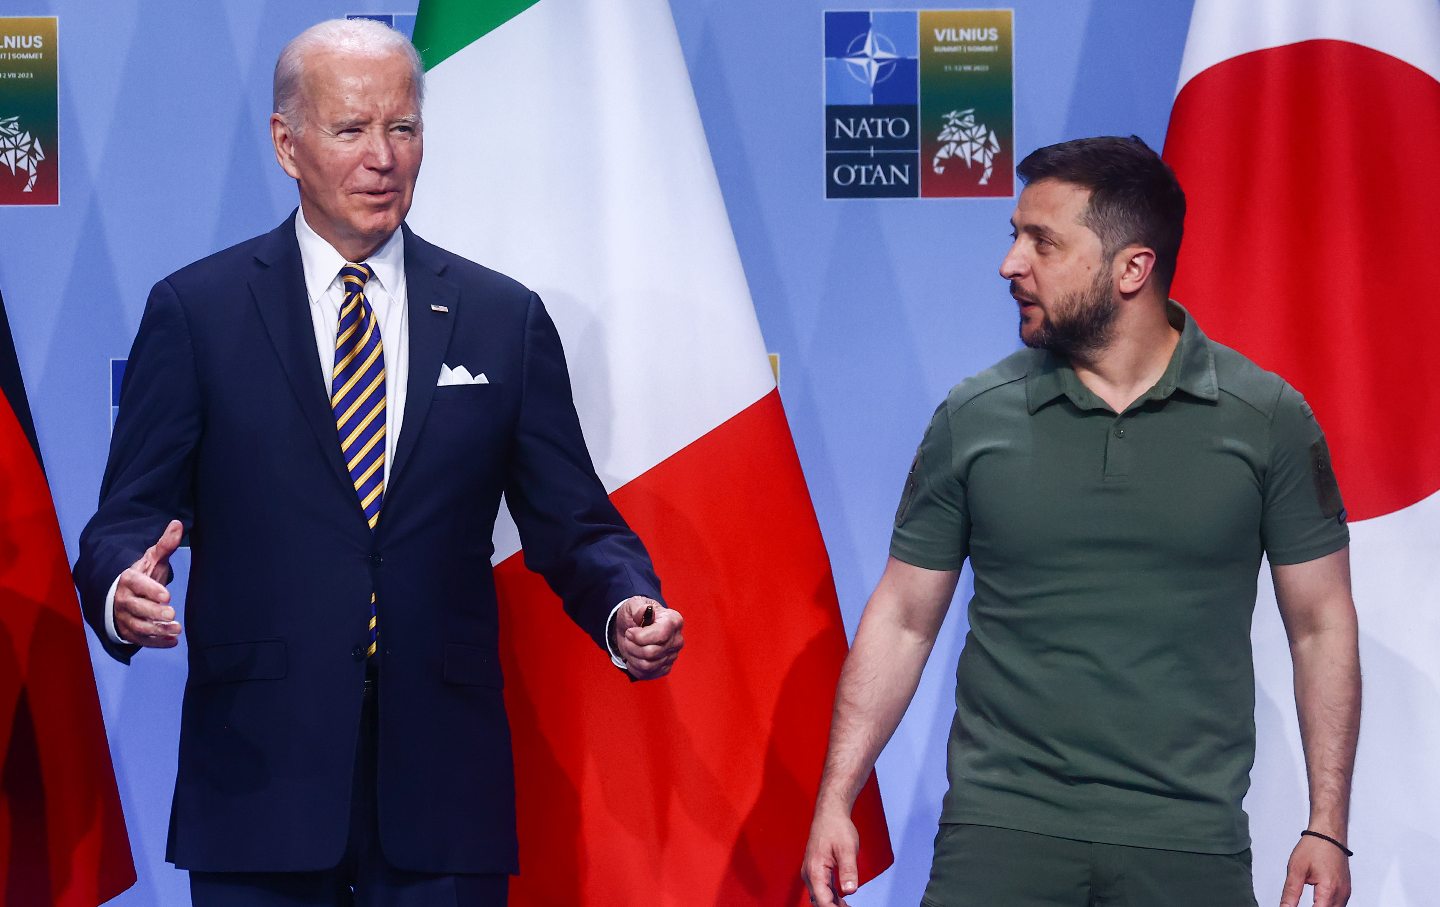 Joe Biden and Volodomyr Zelenskyy attend the G7 Declaration of Joint Support for Ukraine during the NATO Summit in Lithuania, on July 12.